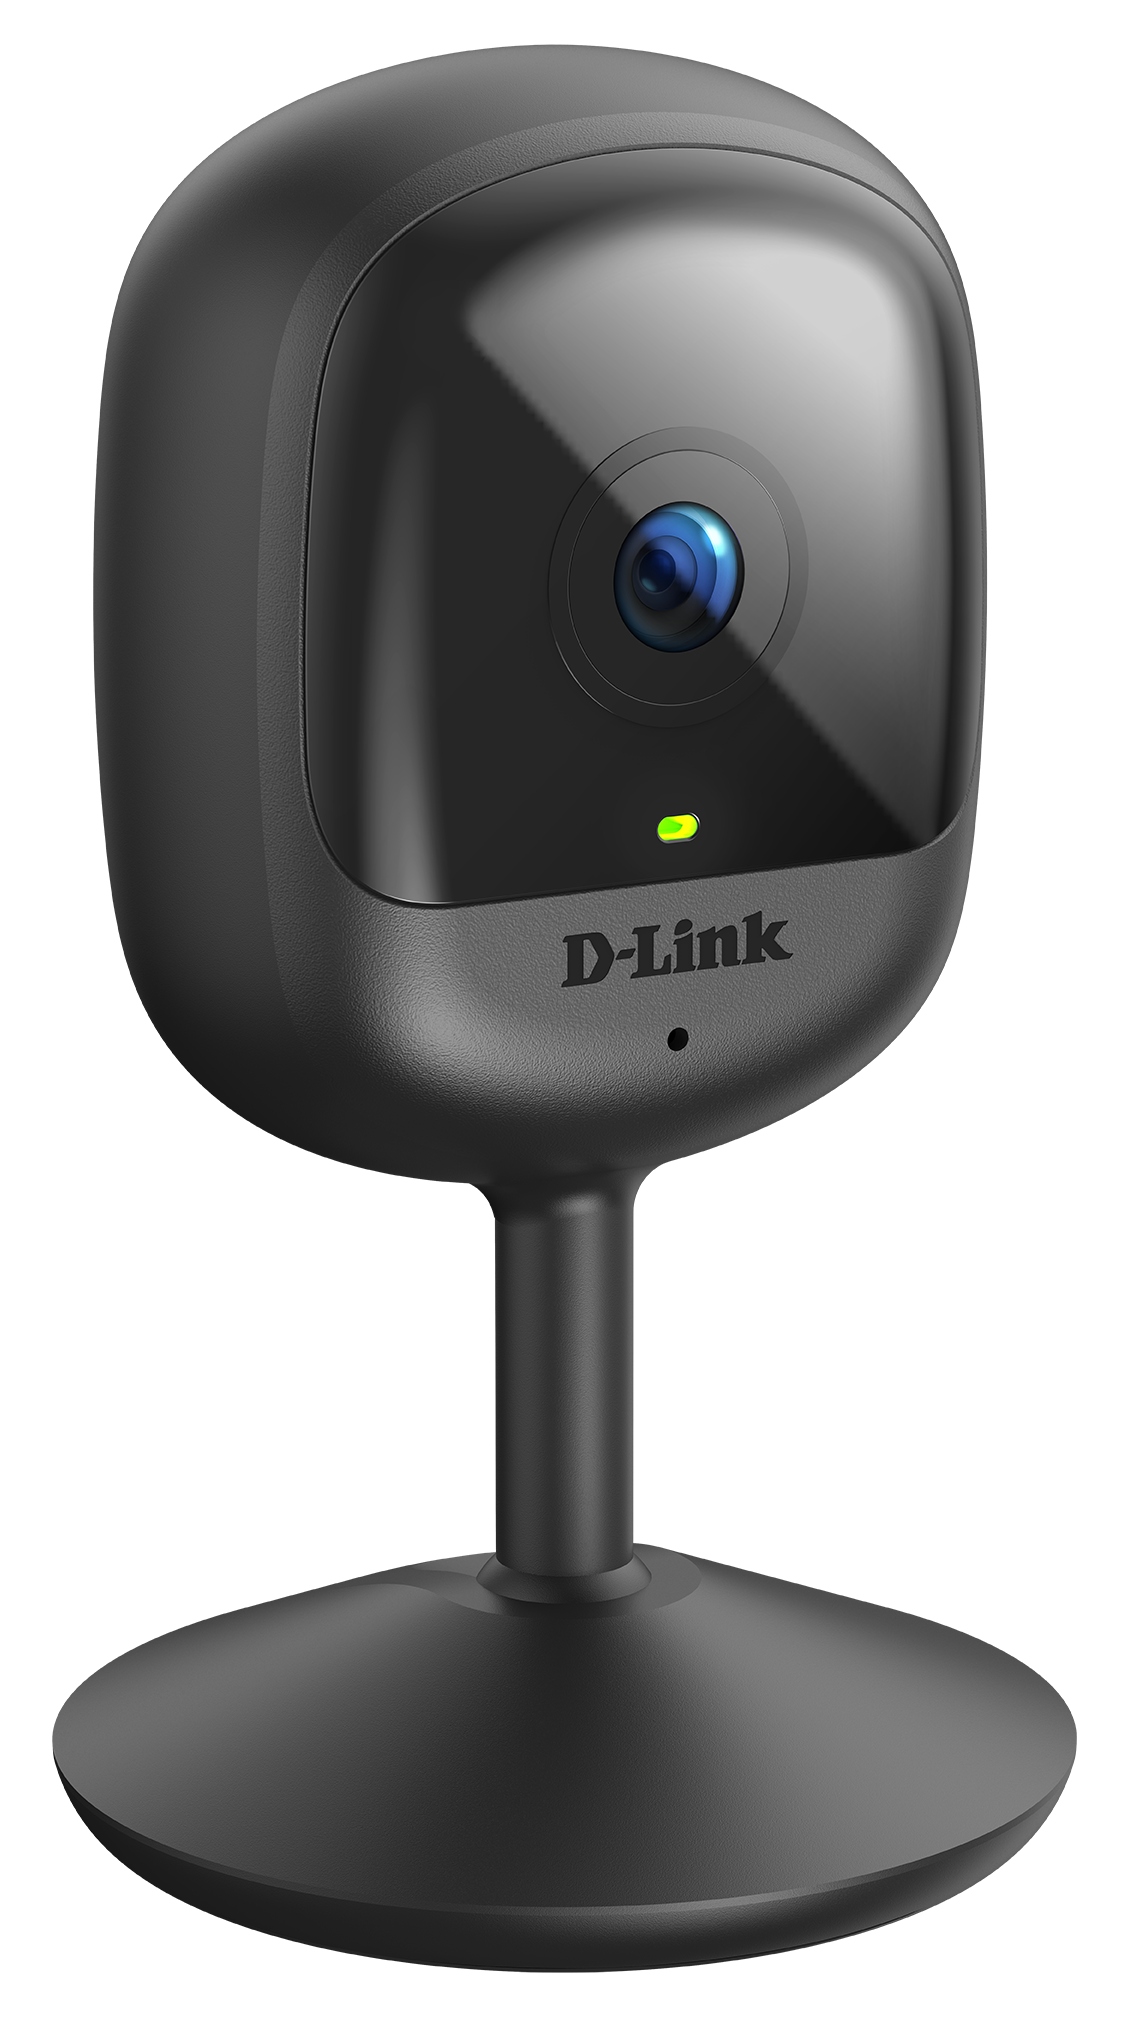 DCS-6100LH	Compact Full HD Wi-Fi Camera - right side view.